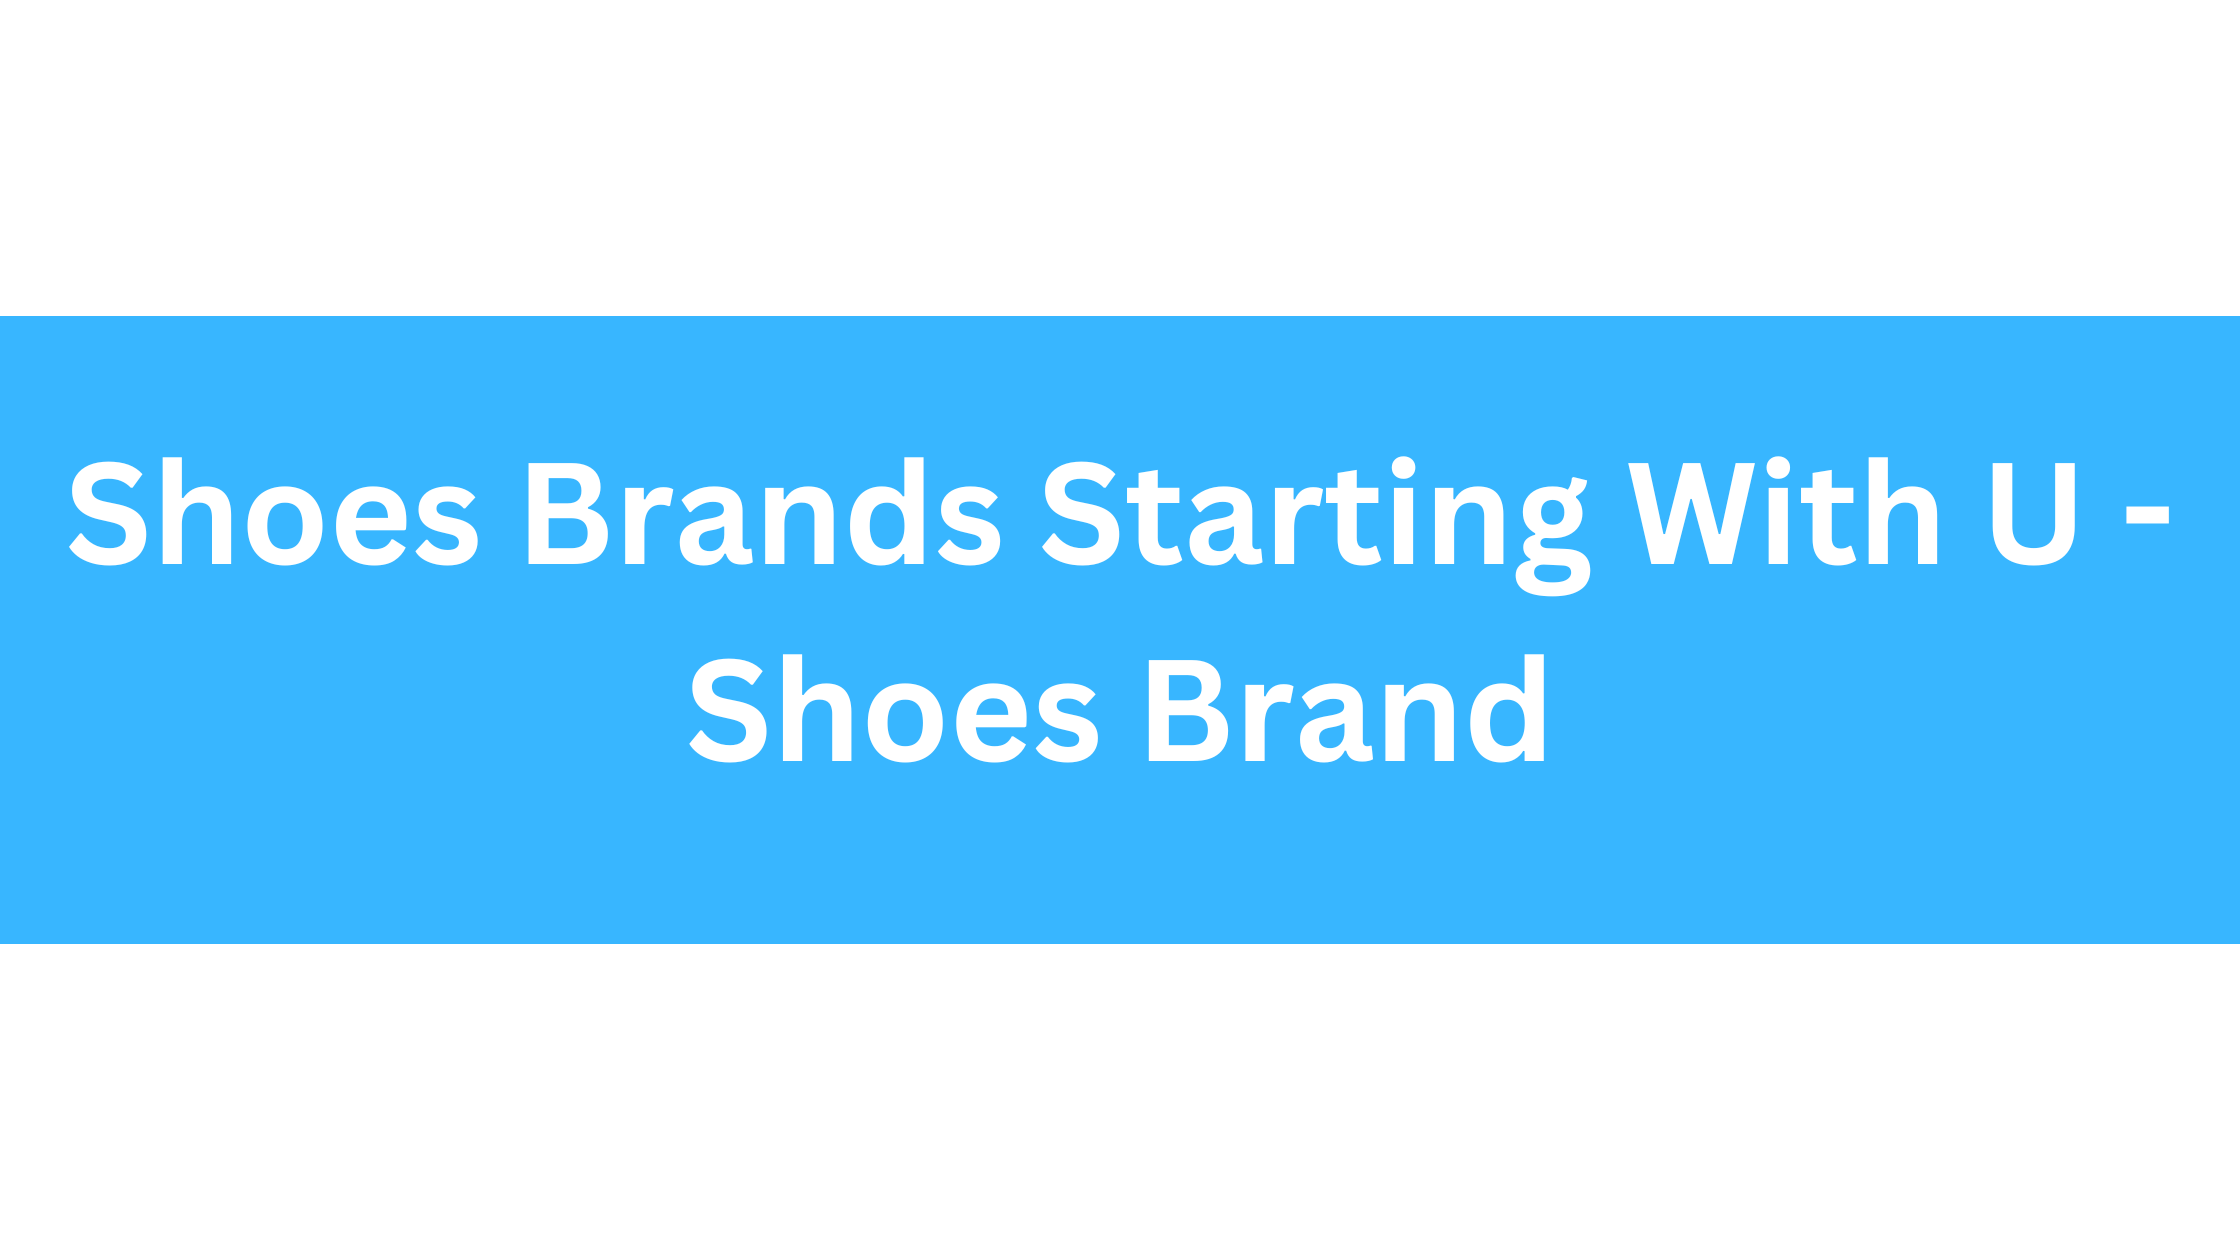 Shoes Brands Starting With U